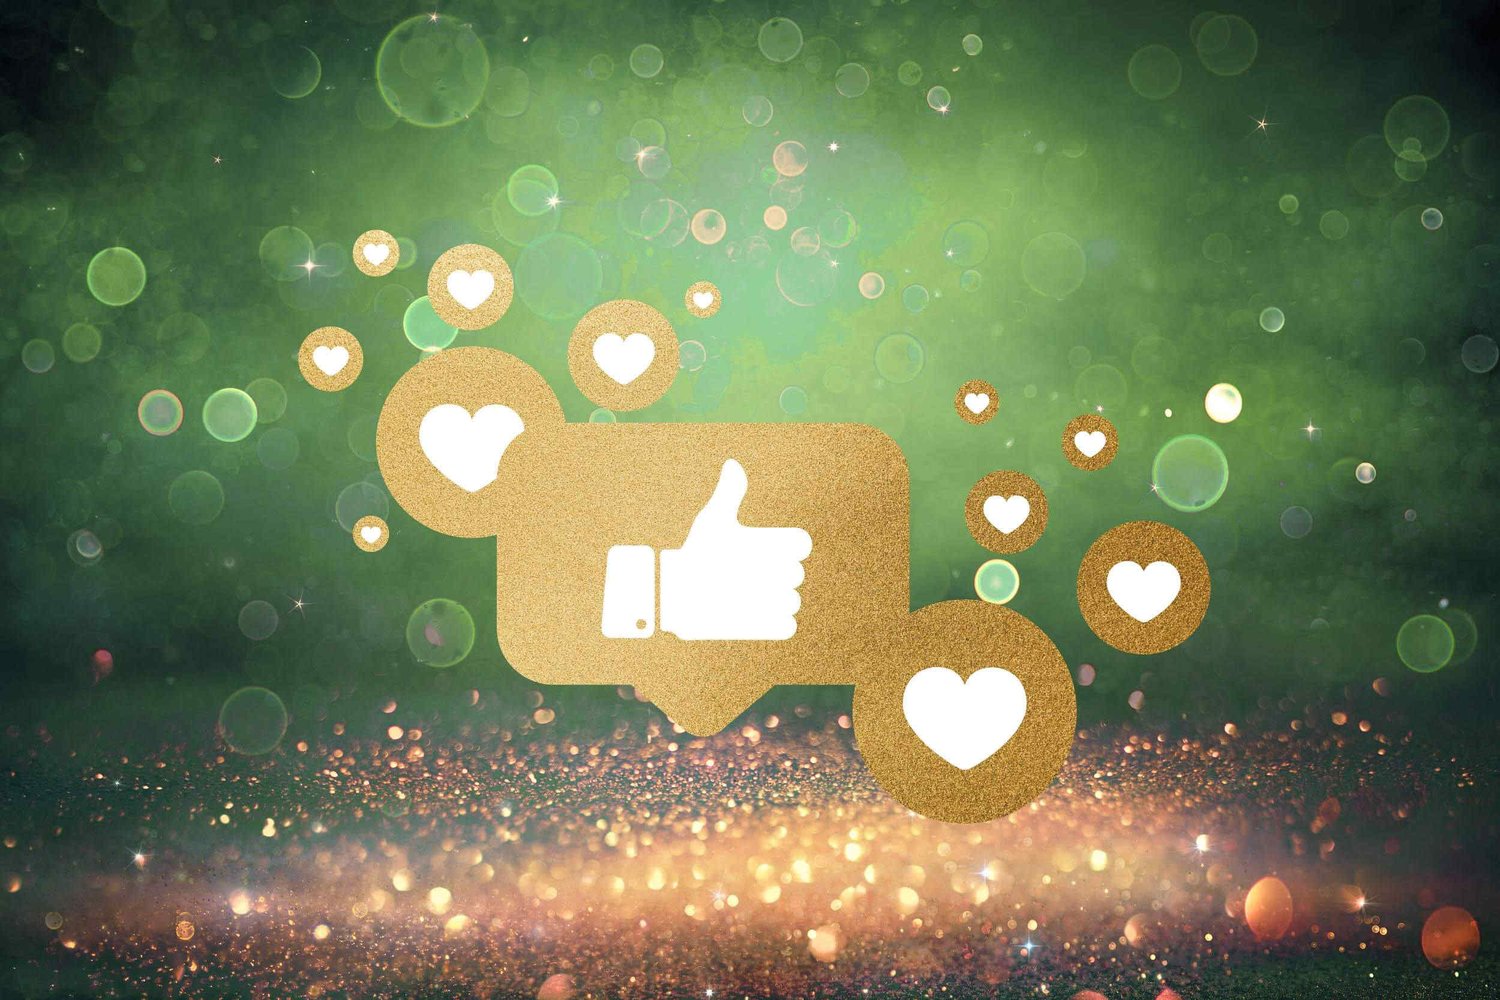 Gold social media icons floating over a glittery surface